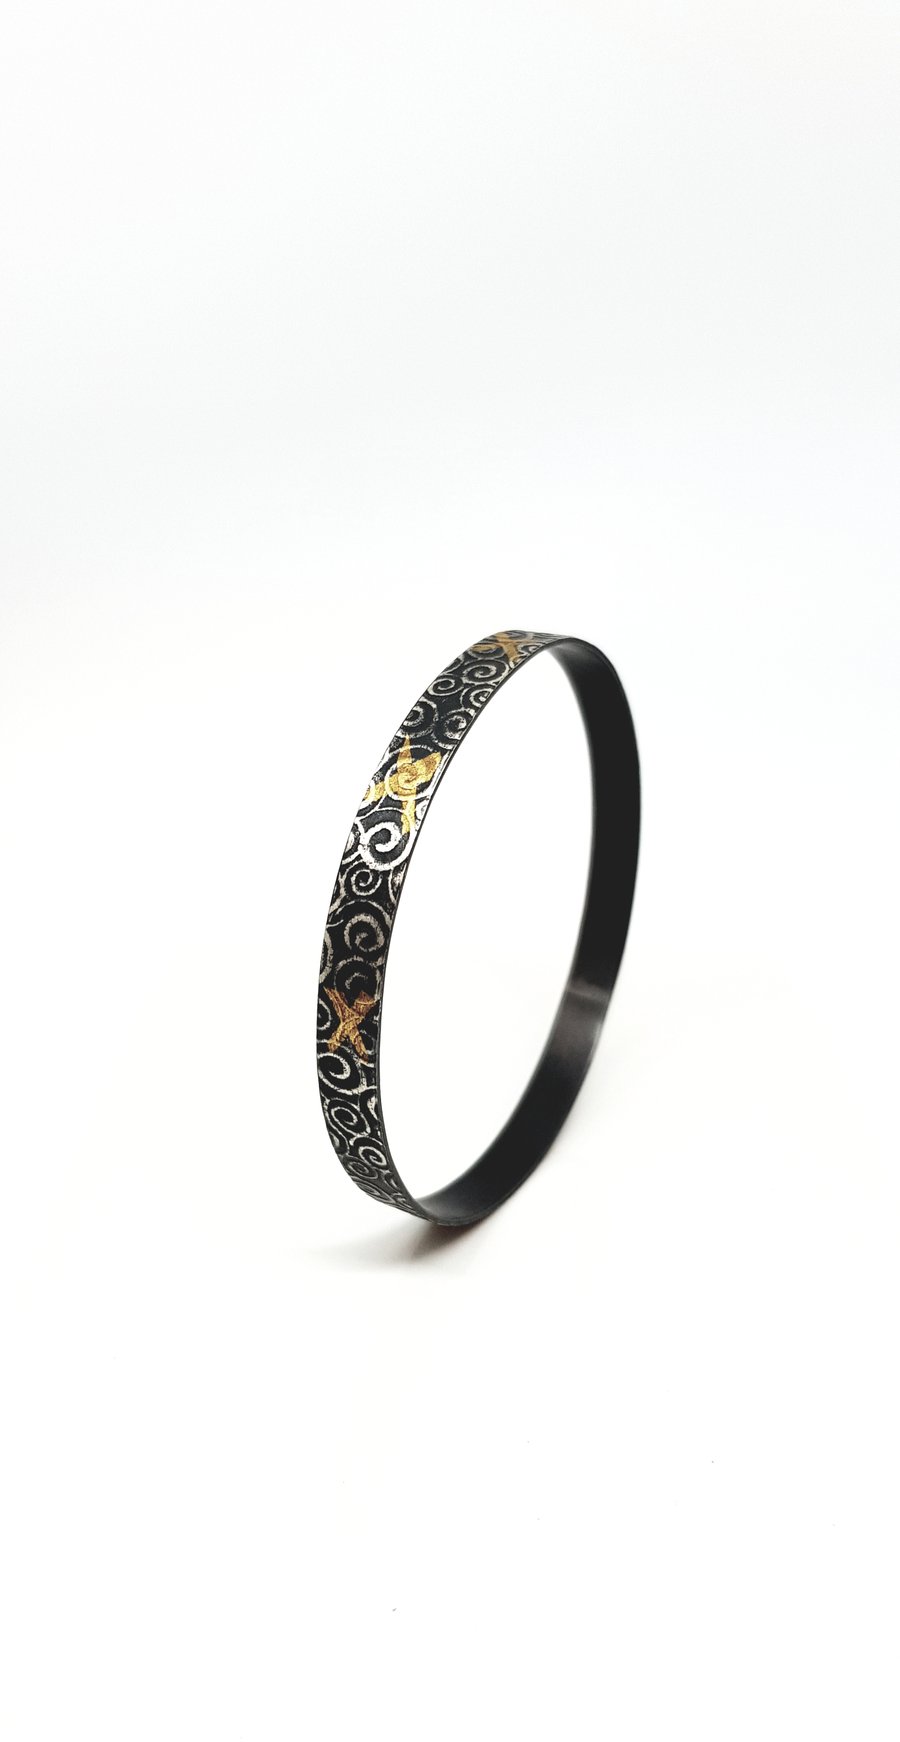 Noa by Fedha - oxidised, embossed sterling silver bangle with Keum Boo detail